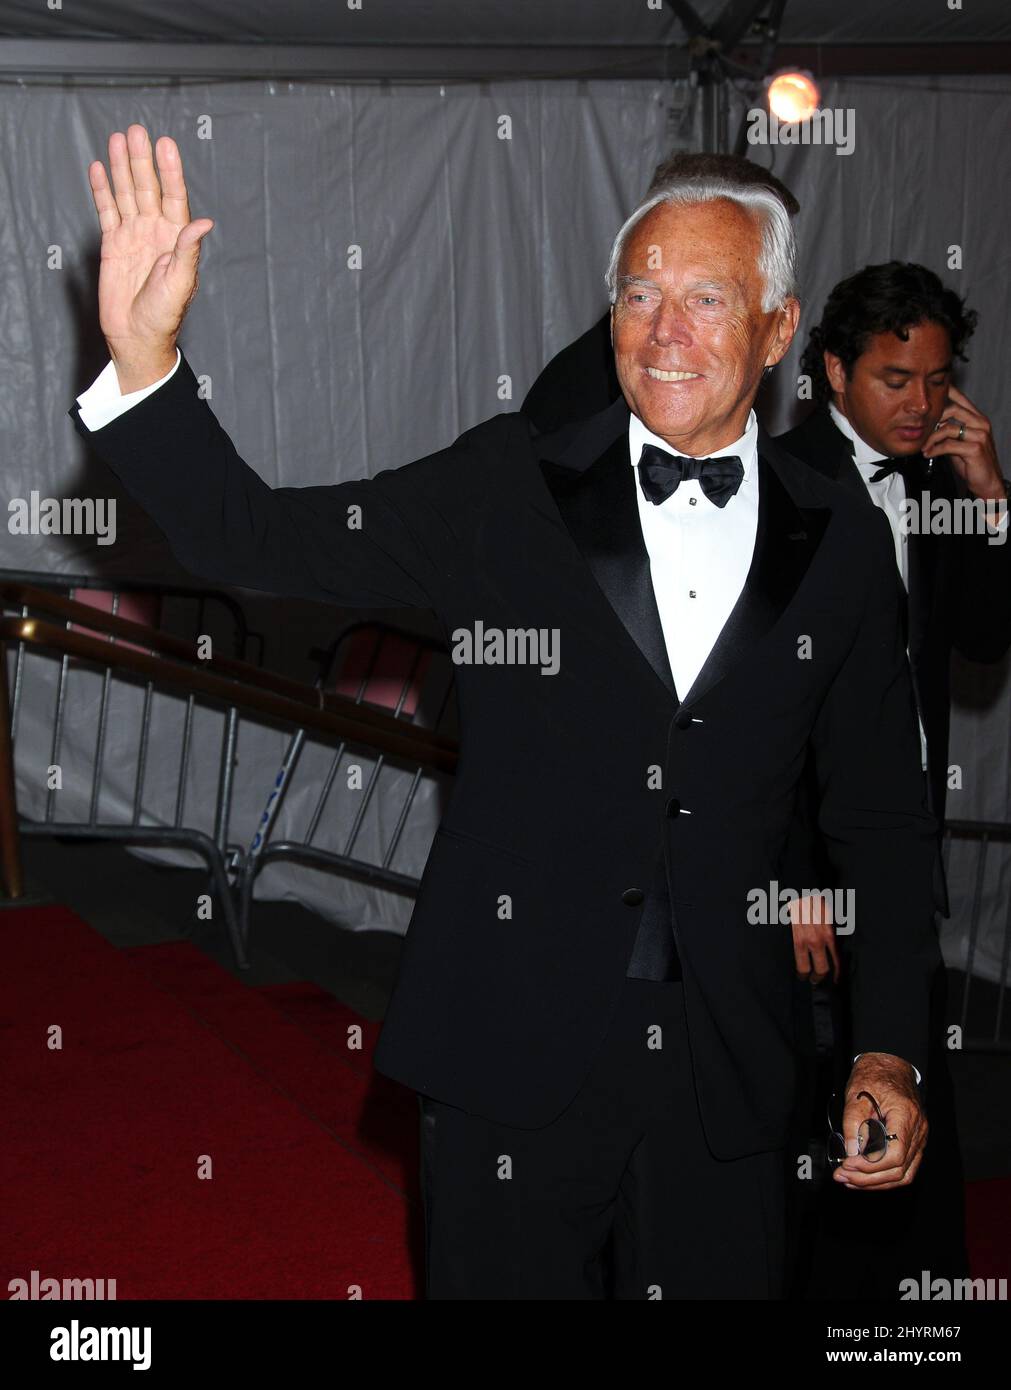 Giorgio Armani arriving at the Costume Institute Gala held at the Metropolitan Museum in New York City. Stock Photo